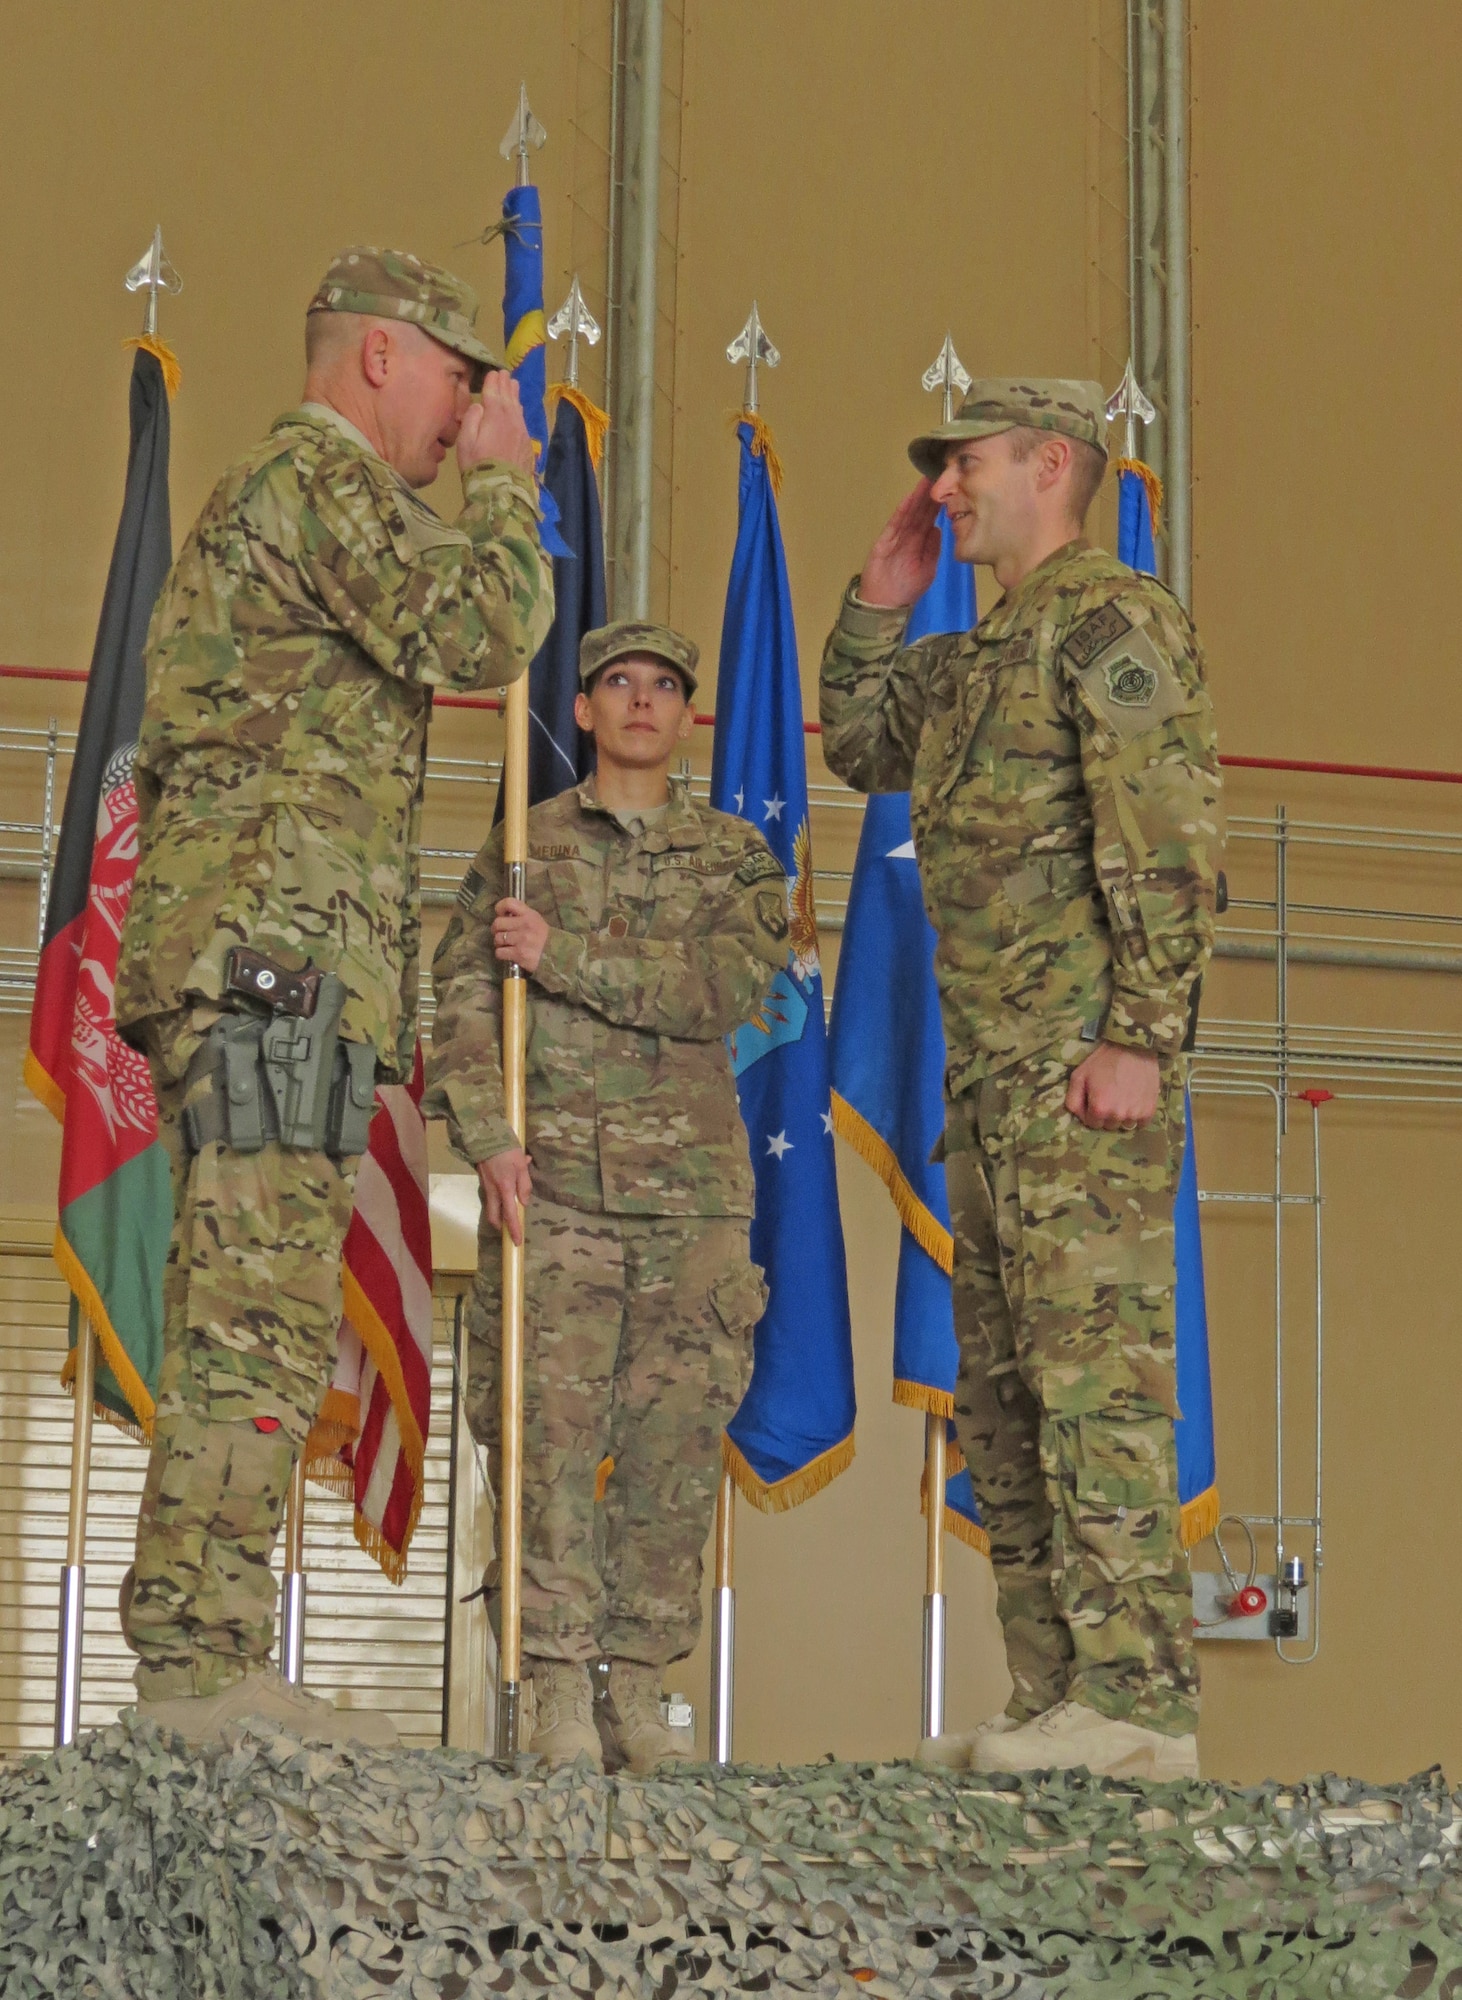 U.S. Air Force Brig. Gen. Patrick Malackowski, 455th Air Expeditionary Wing commander, salutes Col. Scott Campbell, 451st Air Expeditionary Group commander, in a transition ceremony at Kandahar Airfield, Afghanistan, Jan. 13, 2014. The 451st Air Expeditionary Wing was transitioned to an AEG due to a change in mission.(U.S. Air Force photo by Senior Airman Alexandria Bandin/Released)                    